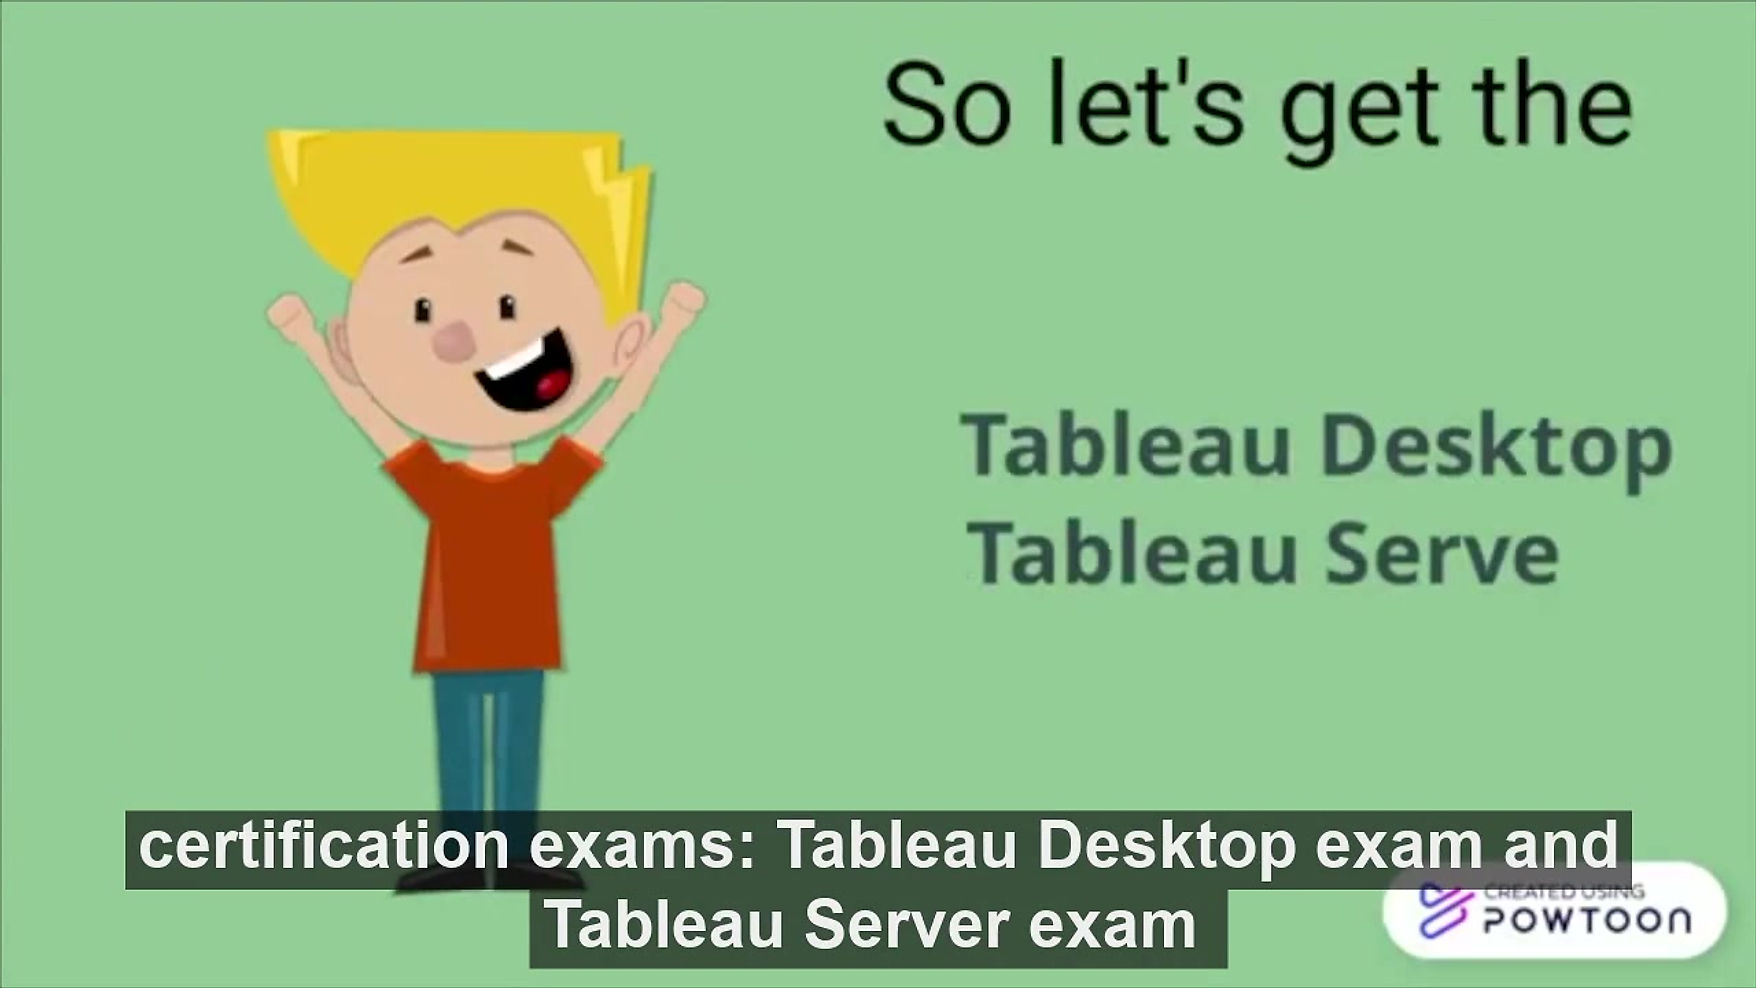 Know more about Tableau !